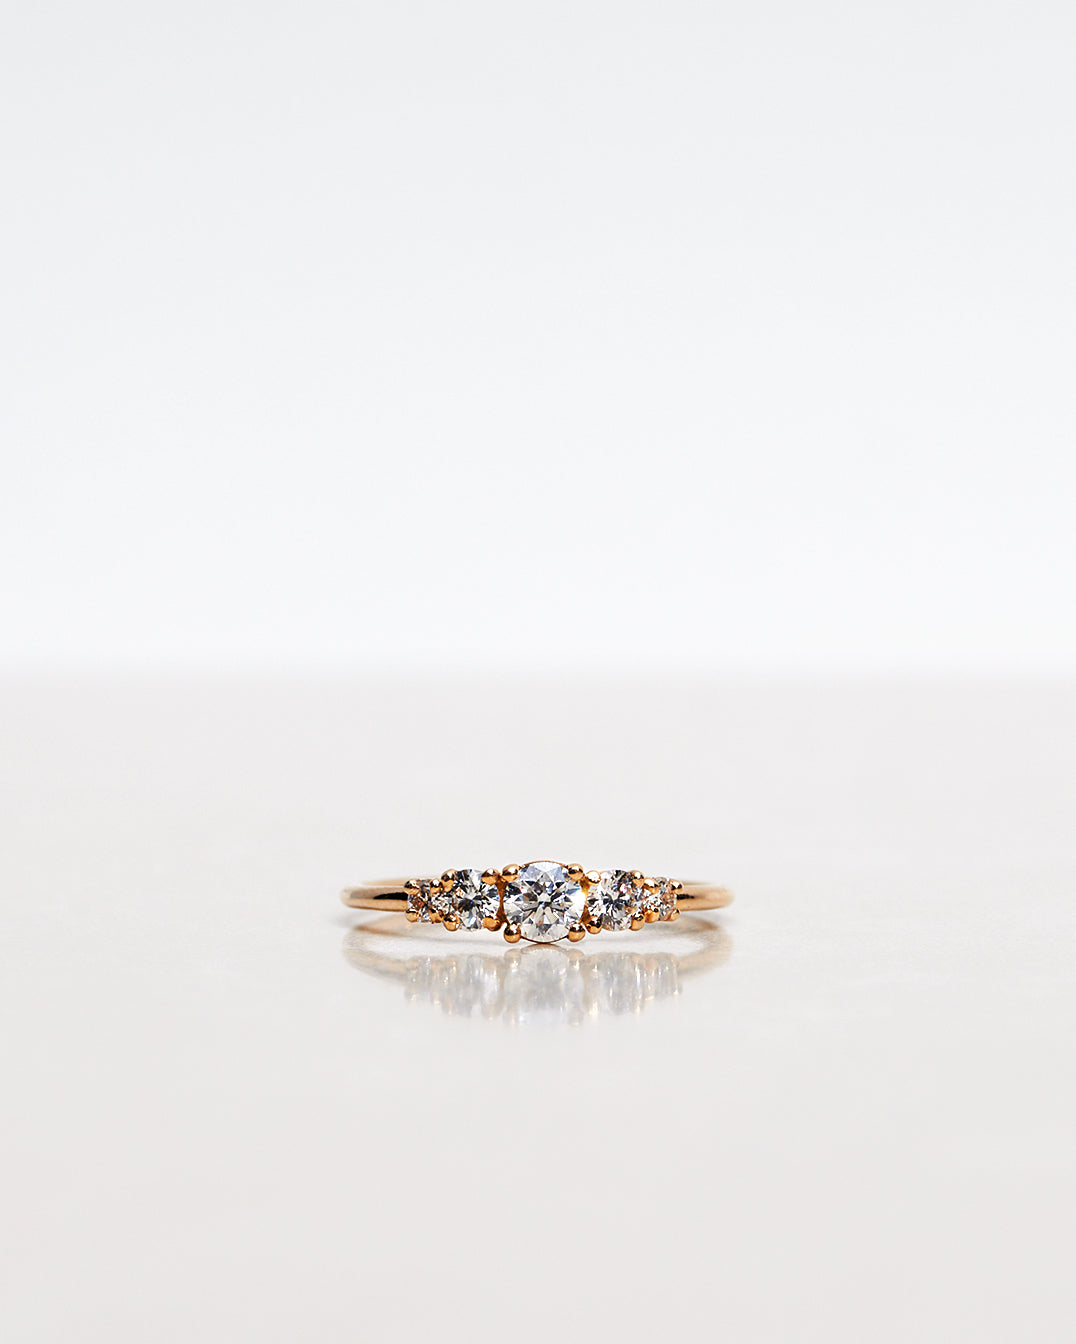 Mumbaistockholm Fine Jewelry Ring: Elise Ring in 18K yellow gold with five white, conflict-free diamonds. The center diamond is 0.25 CT, and on each side are two 0.11 CT diamonds, and two 0.04 CT diamonds. Pictured from the front.